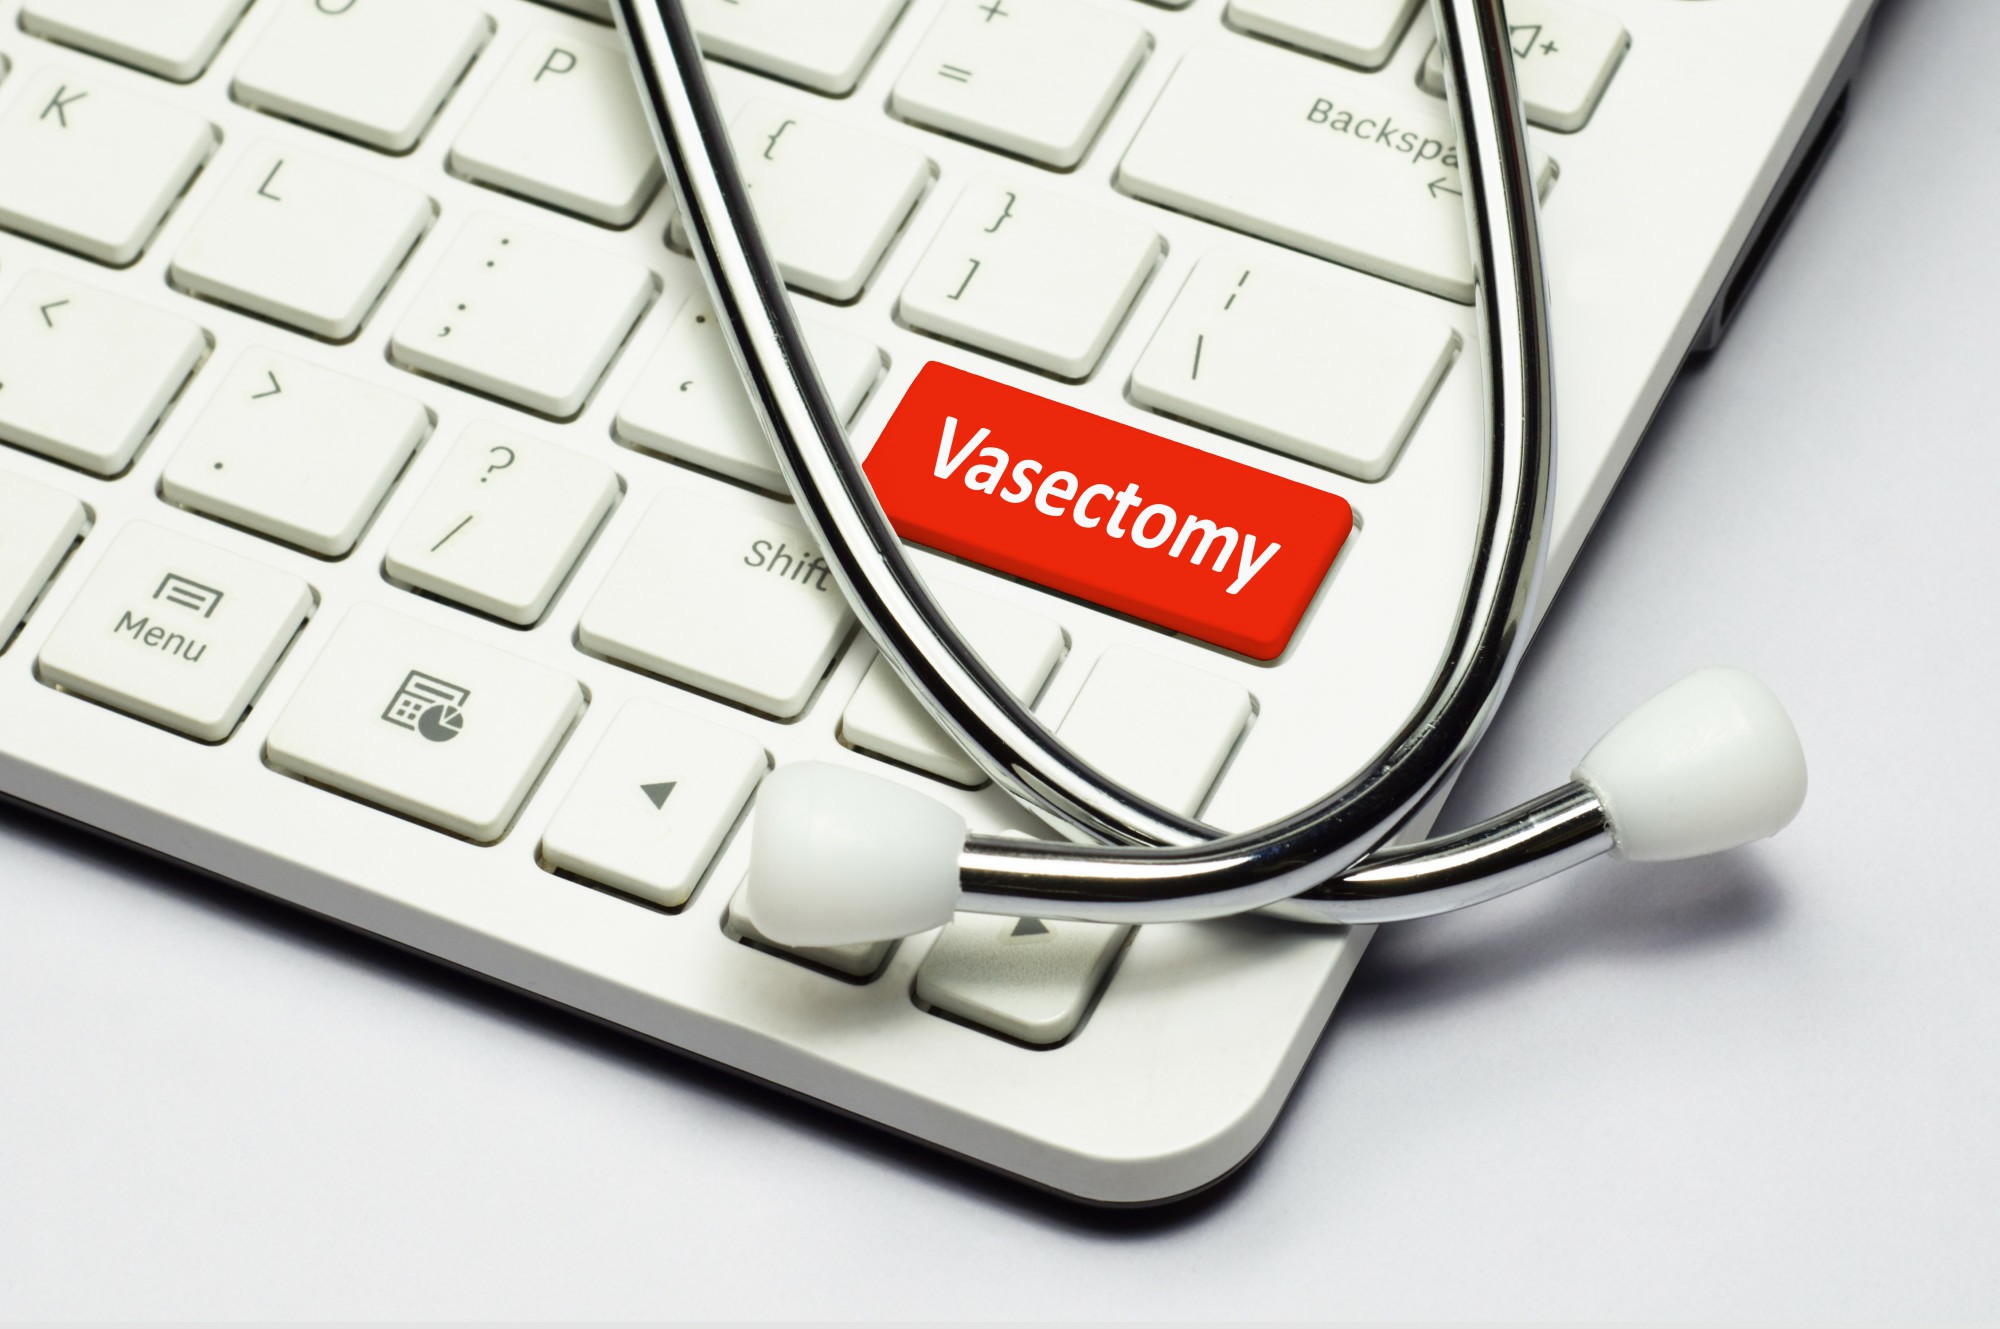 How Many Types of Vasectomy Procedures Are There?